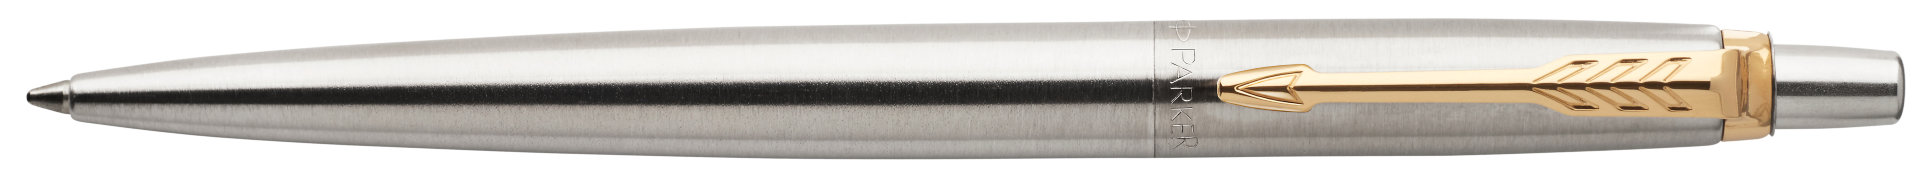 Гелевая ручка Parker Jotter Core K694 Stainless Steel GT